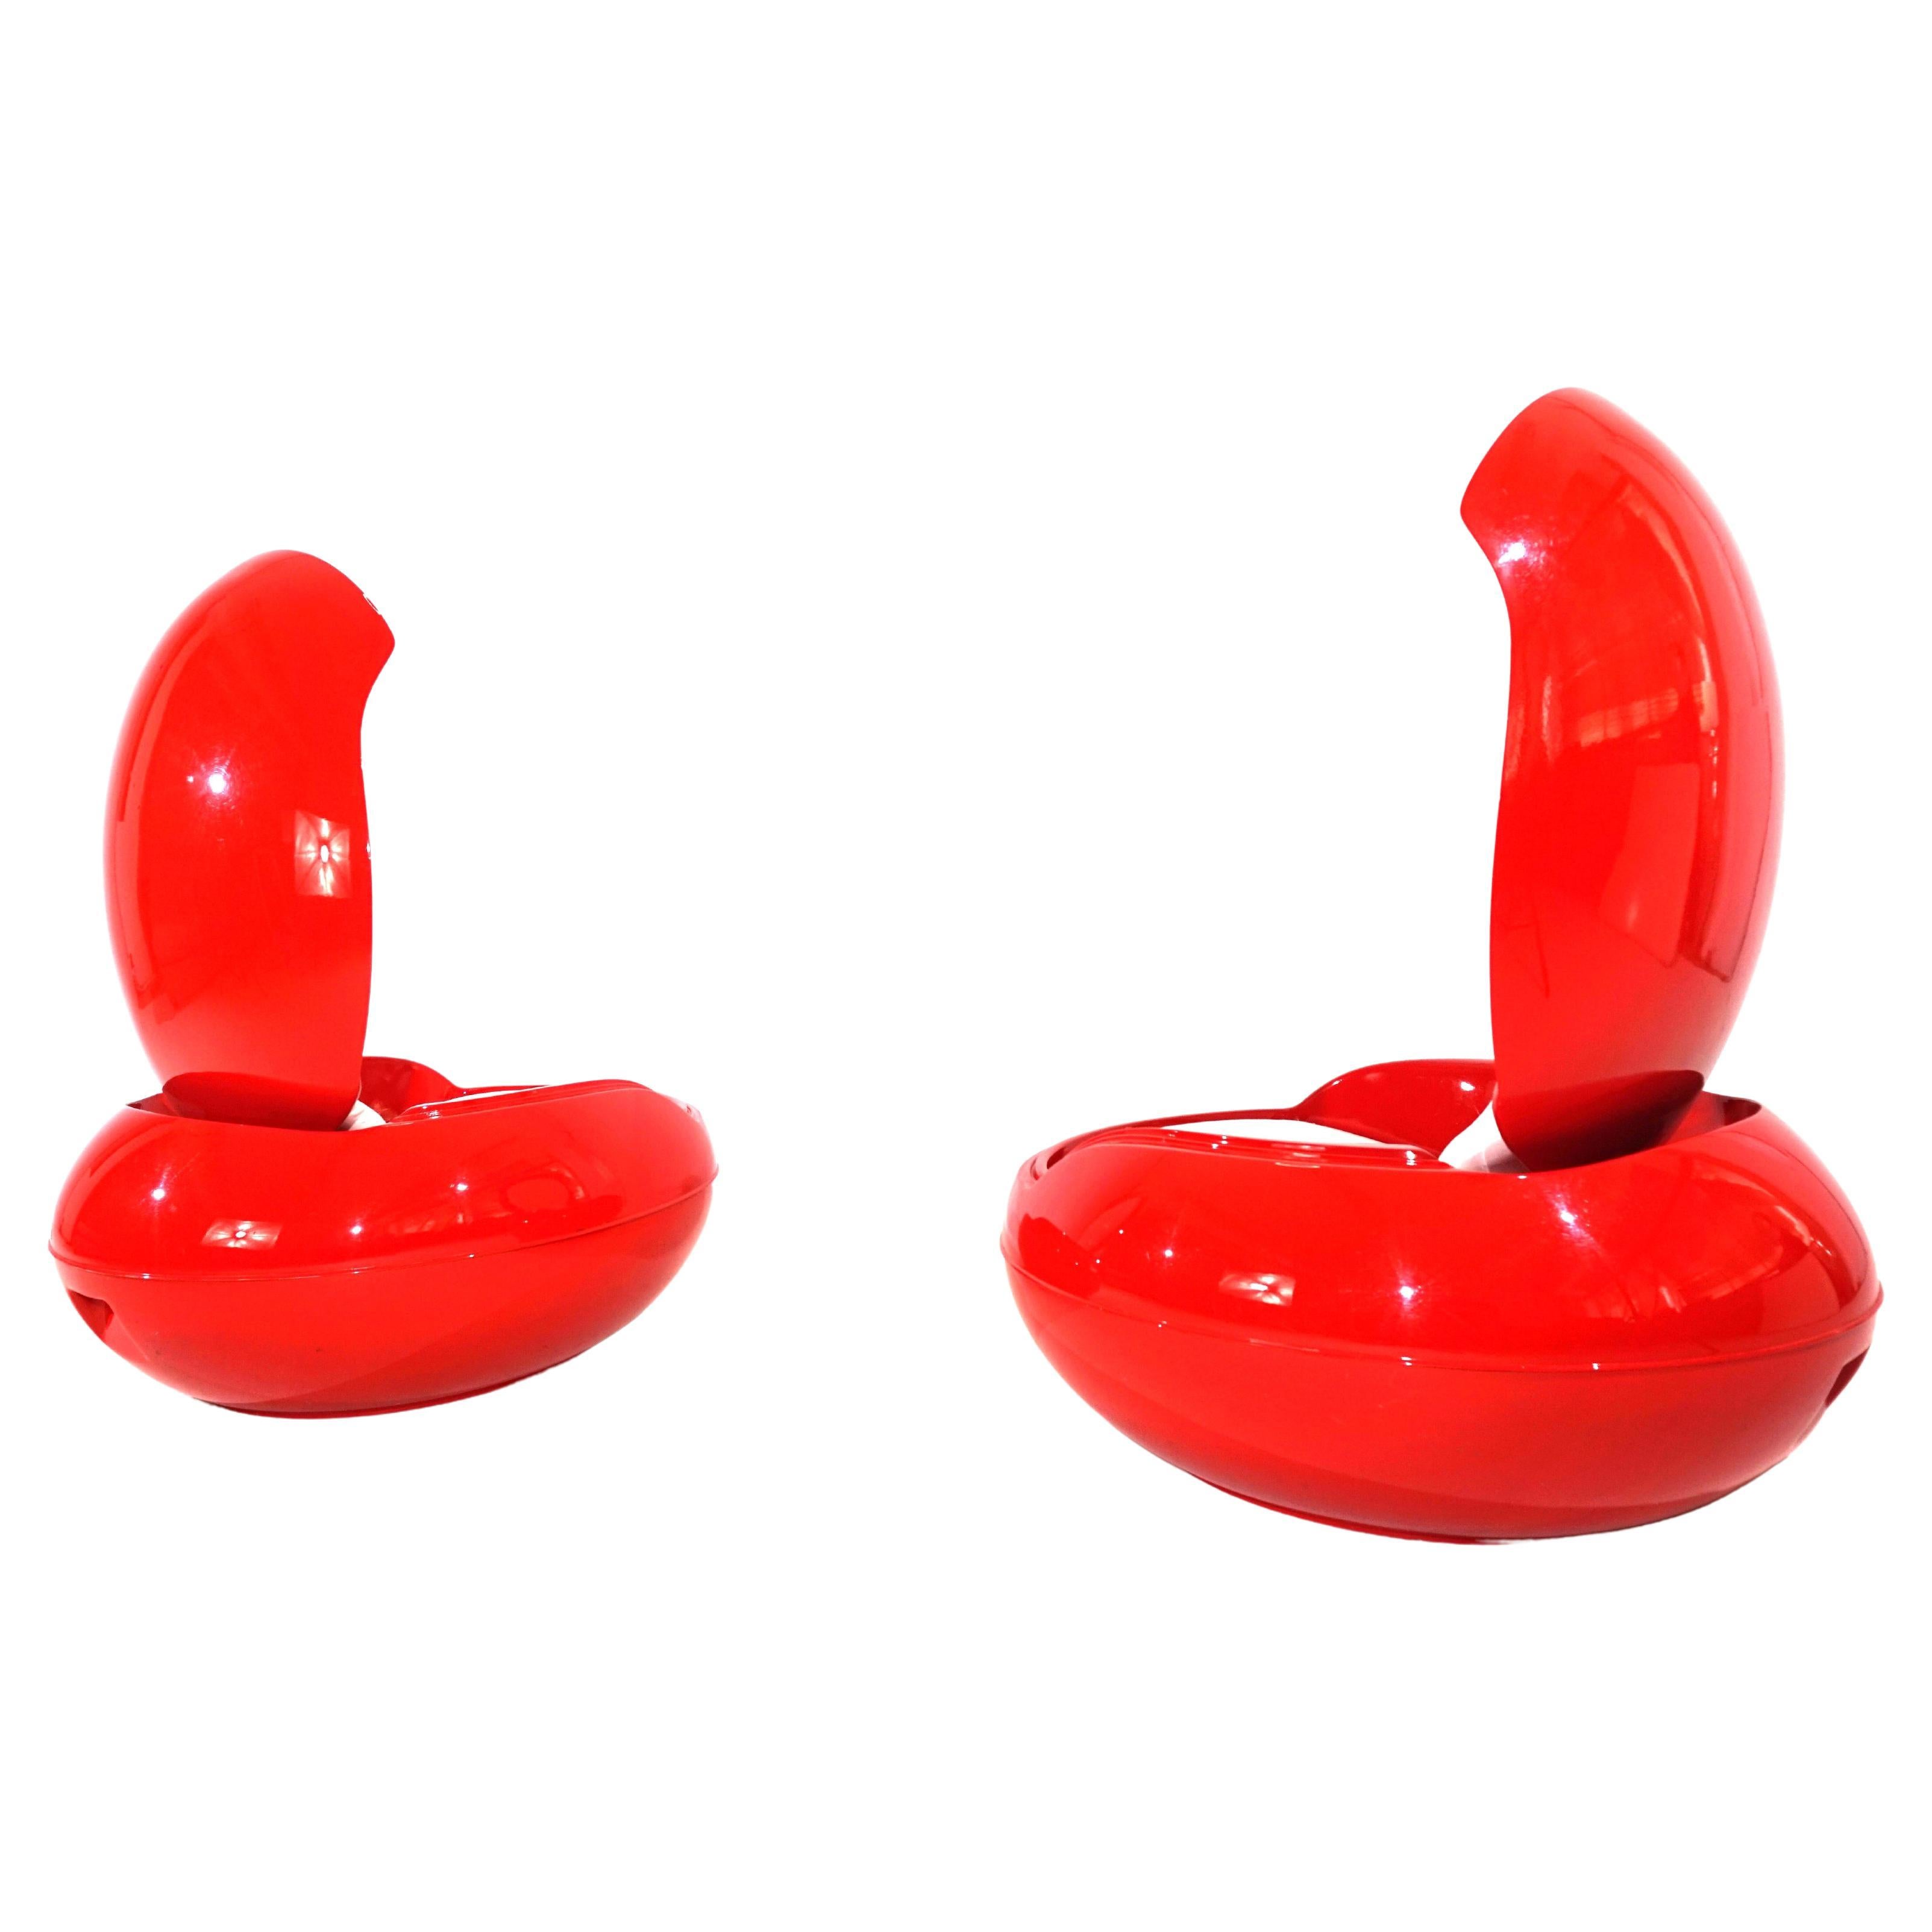 Set of 2 garden egg chairs by Peter Ghyczy for Reuter